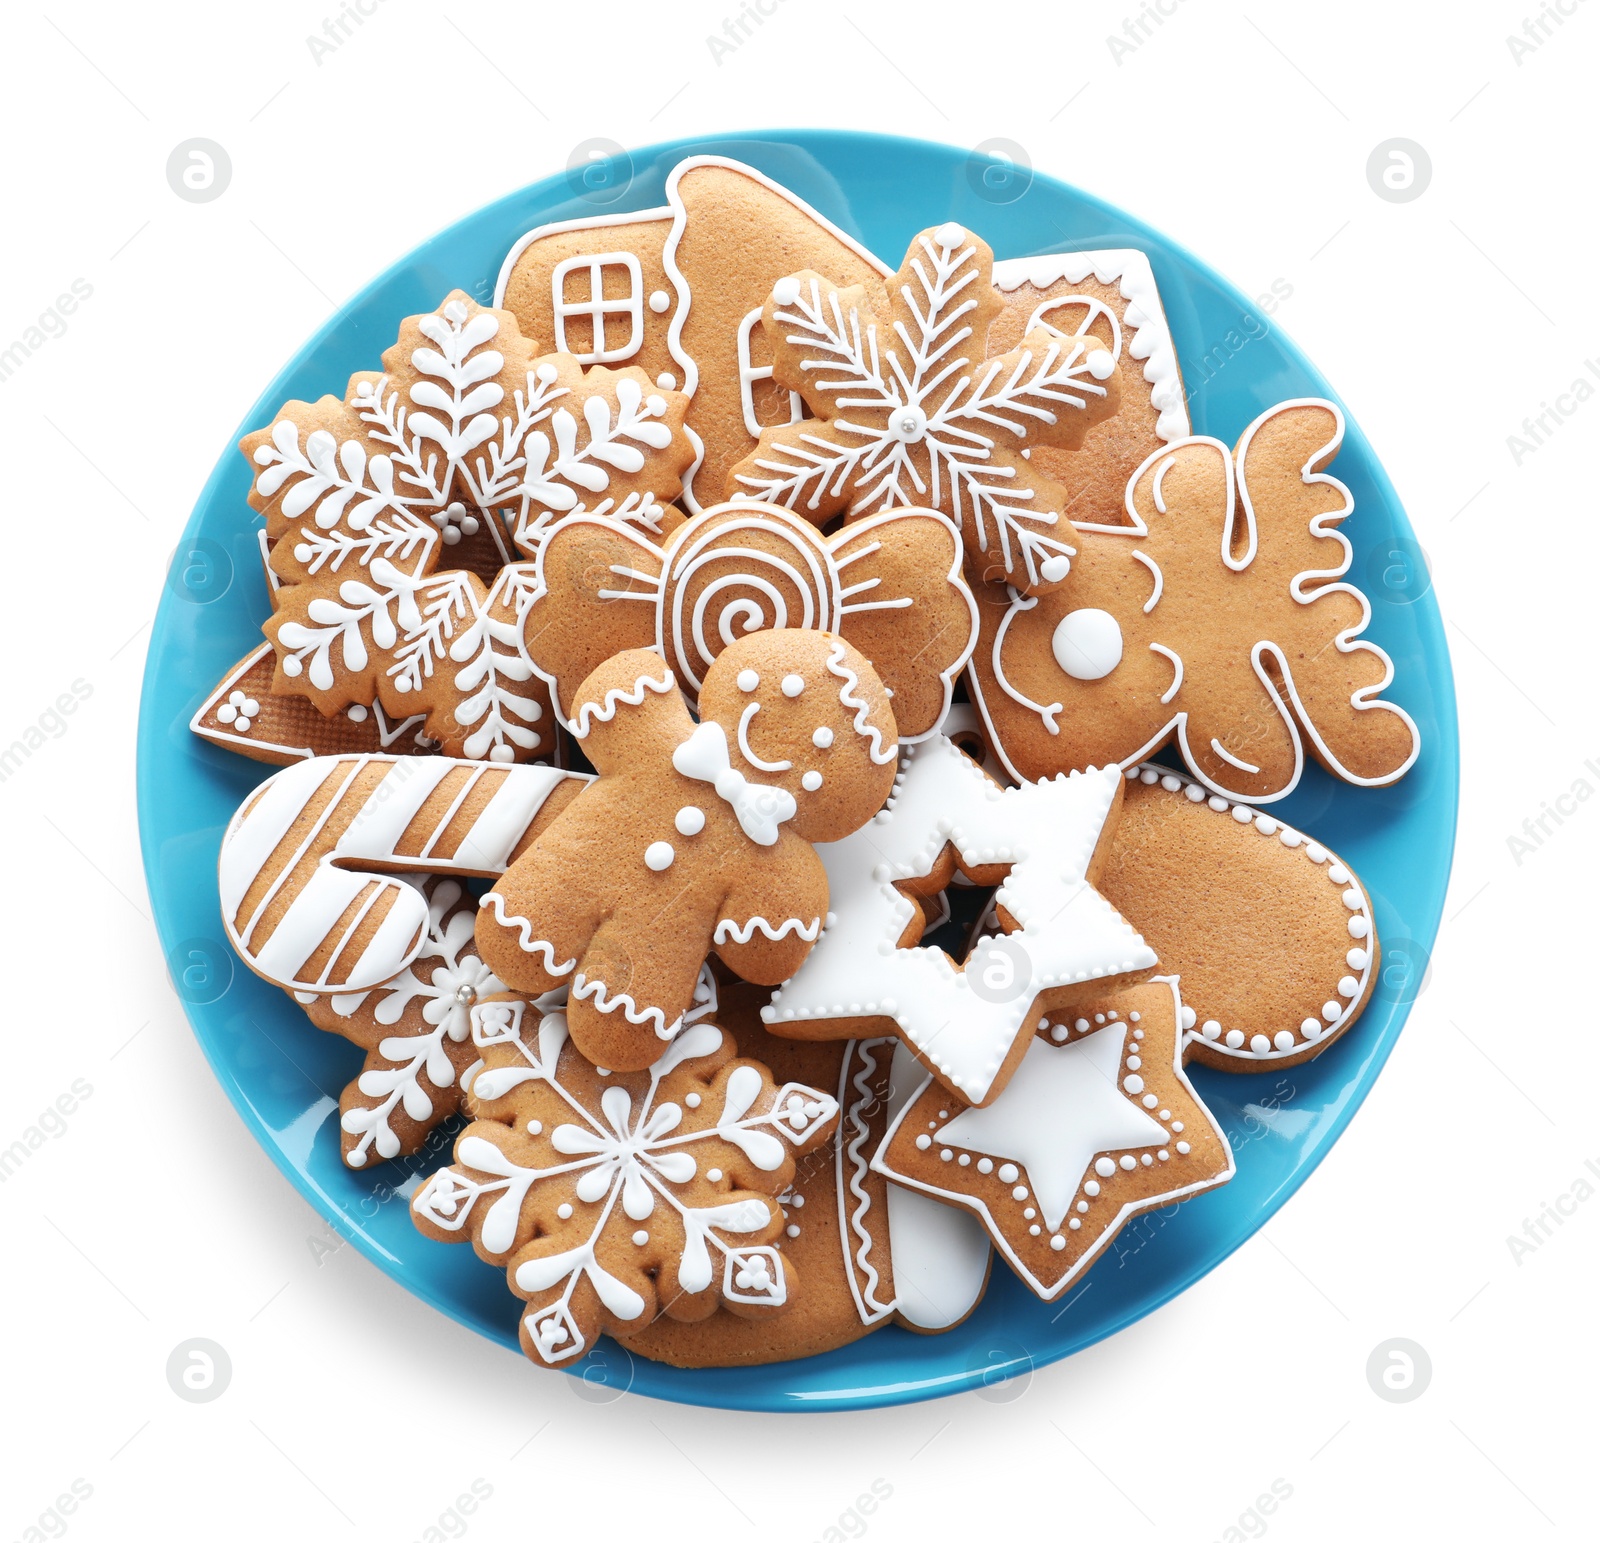 Photo of Delicious gingerbread Christmas cookies on white background, top view